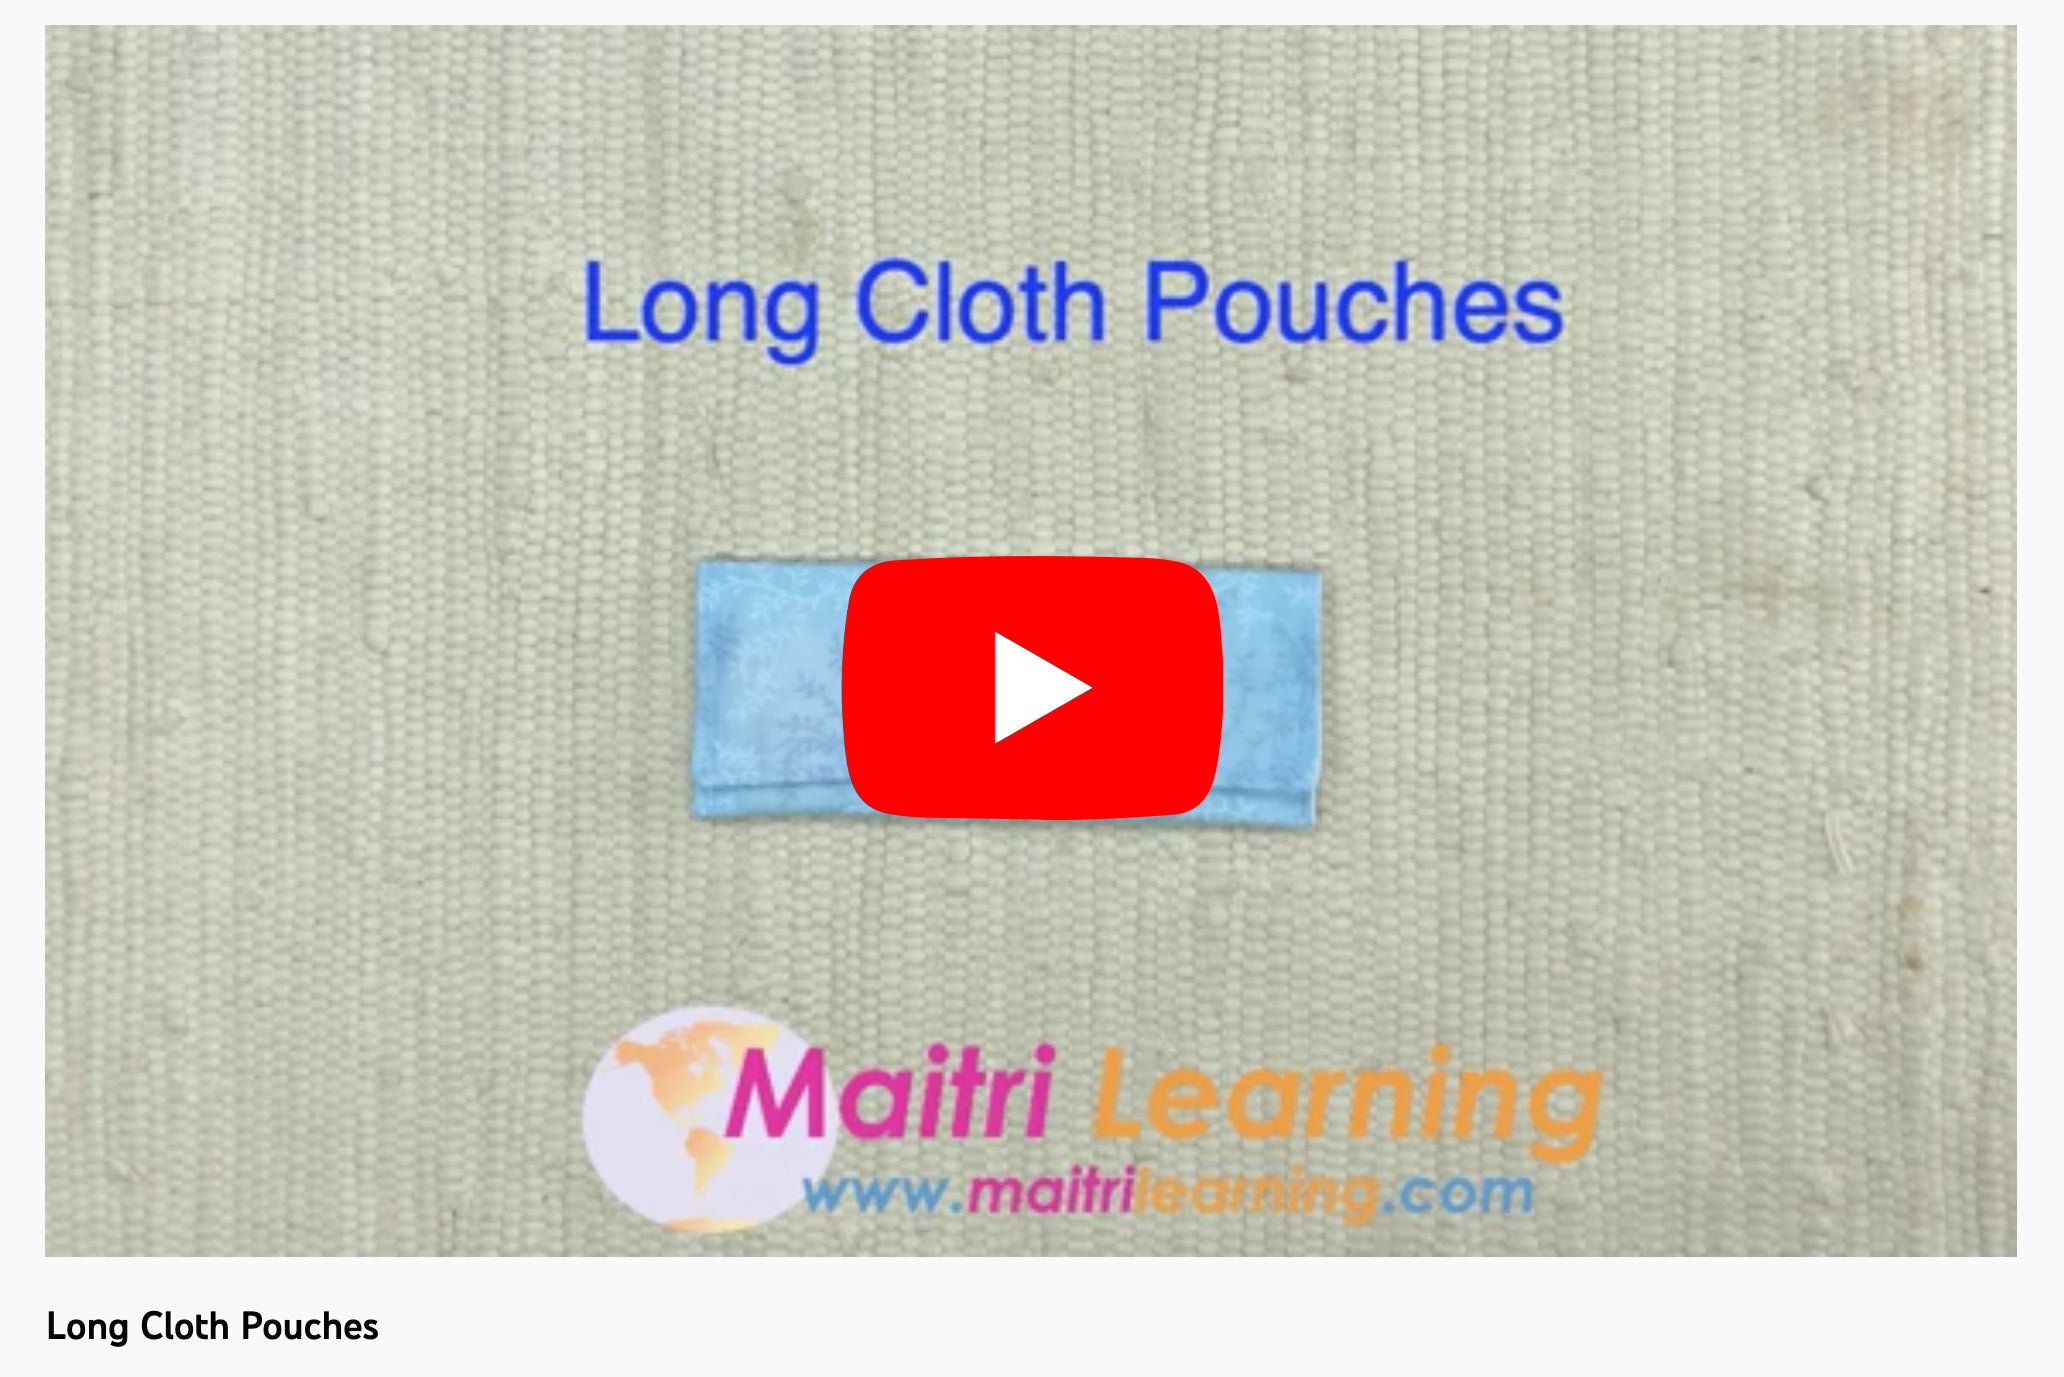 Long cloth pouches: New colors and video!